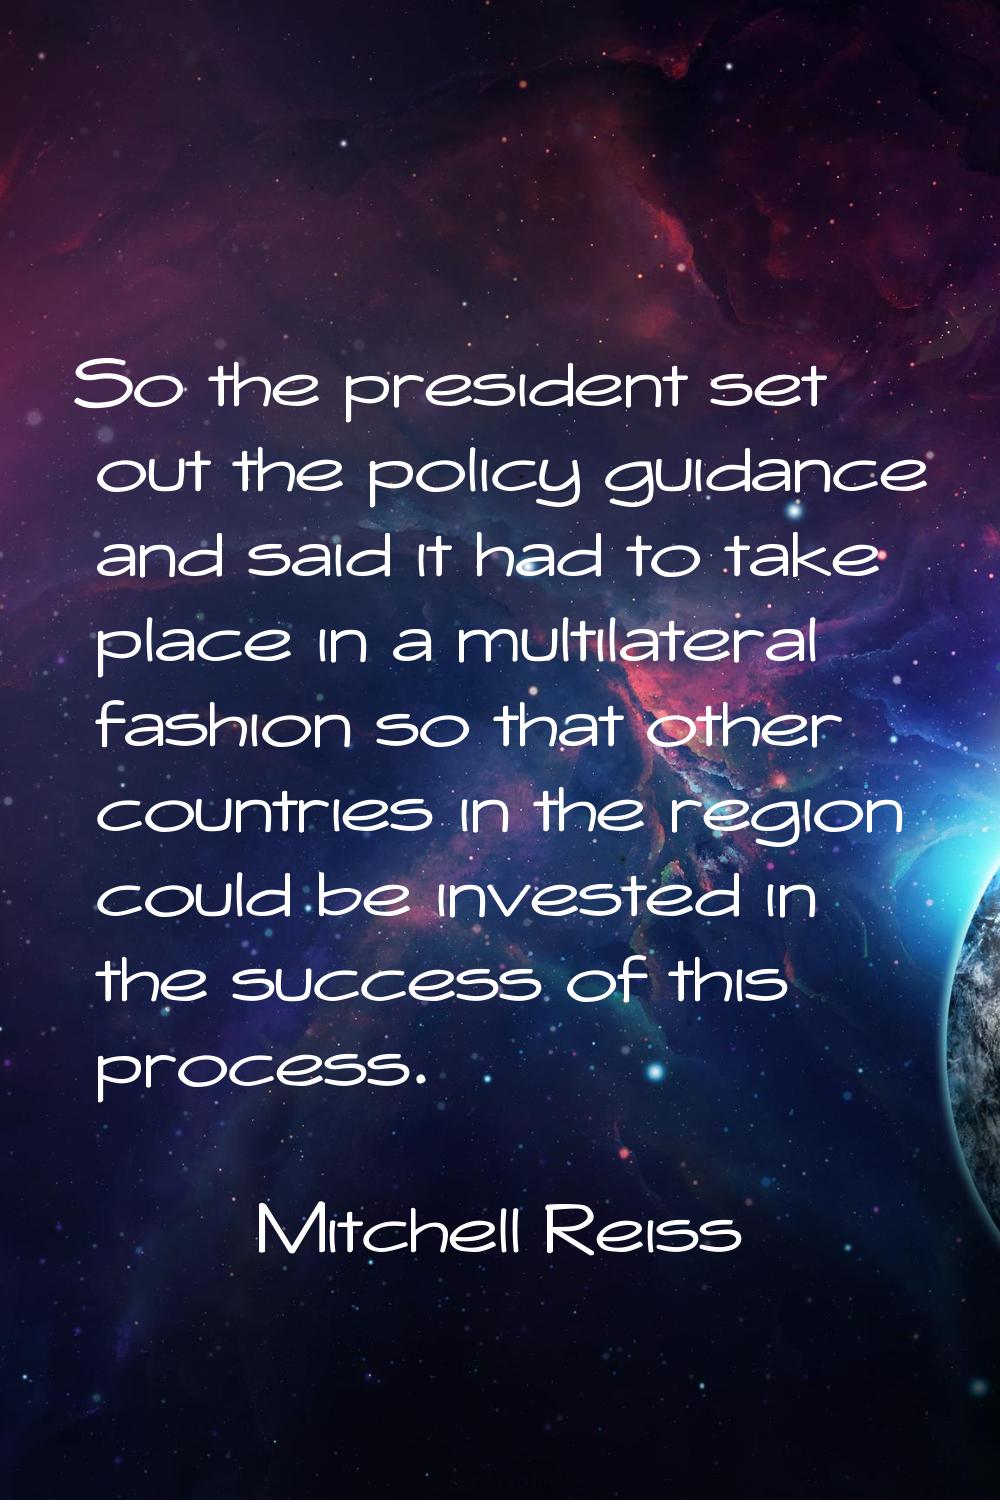 So the president set out the policy guidance and said it had to take place in a multilateral fashio